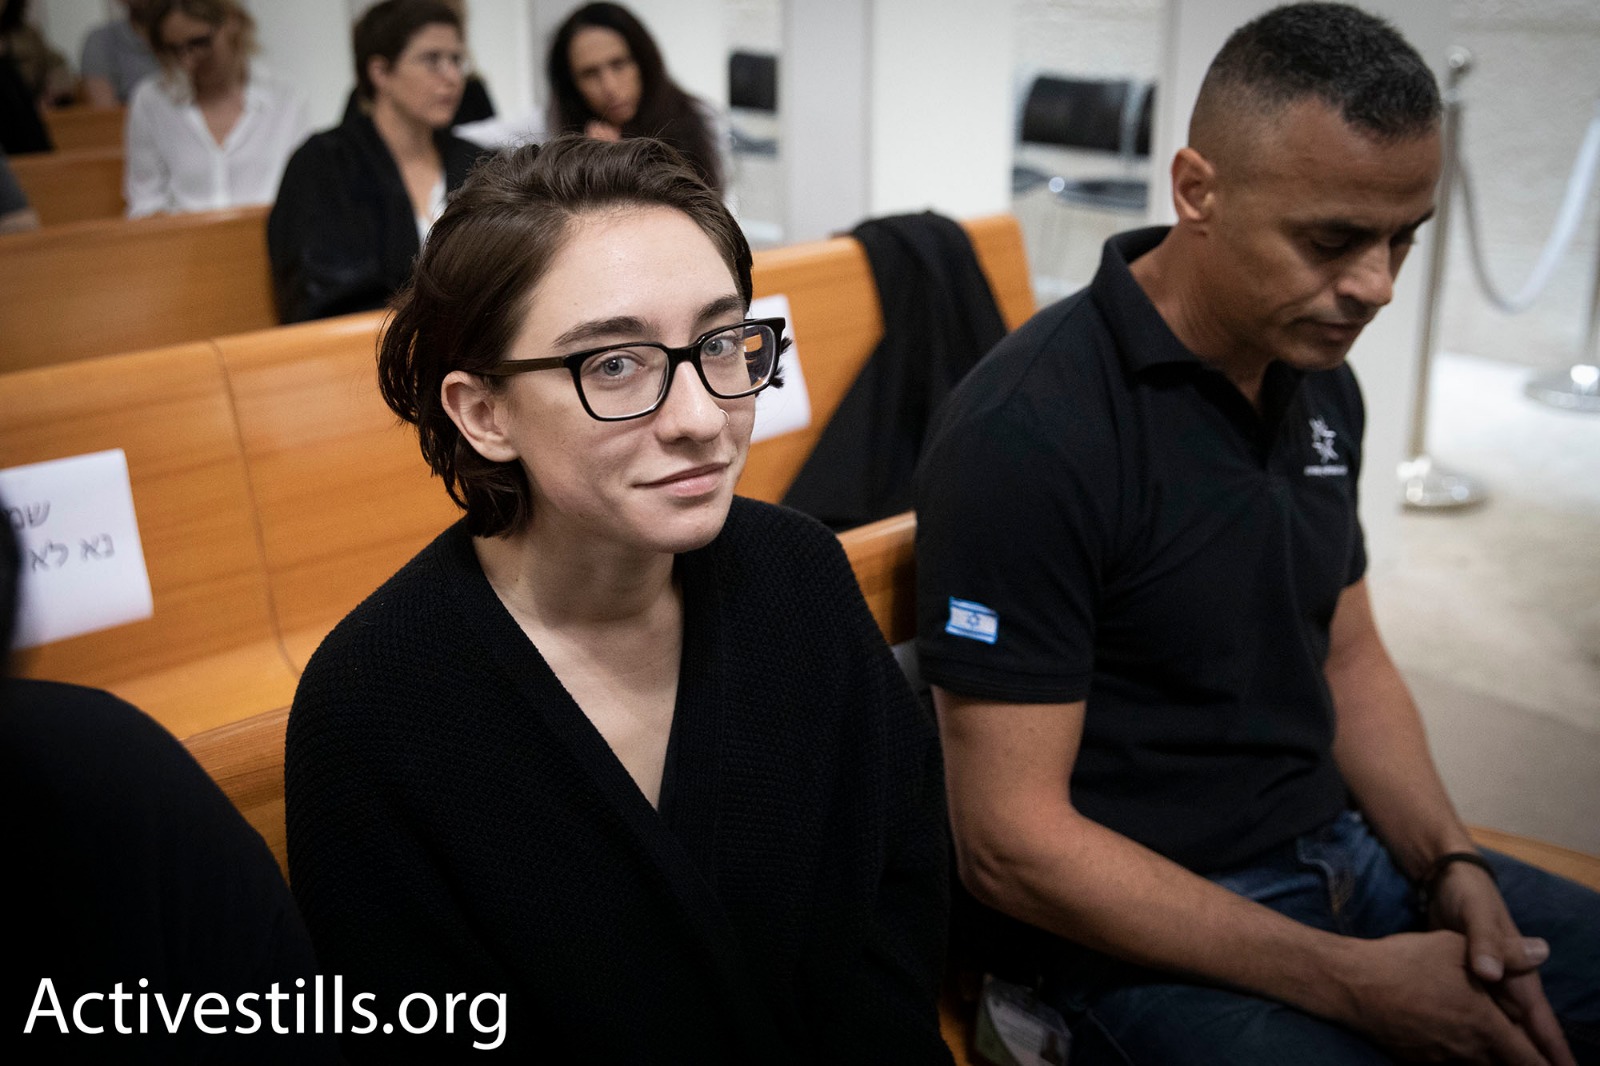 Lara Alqasem, who was denied entry into Israel over her alleged support for BDS, is seen in the Supreme Court, October 17, 2018. (Oren Ziv/Activestills.org)